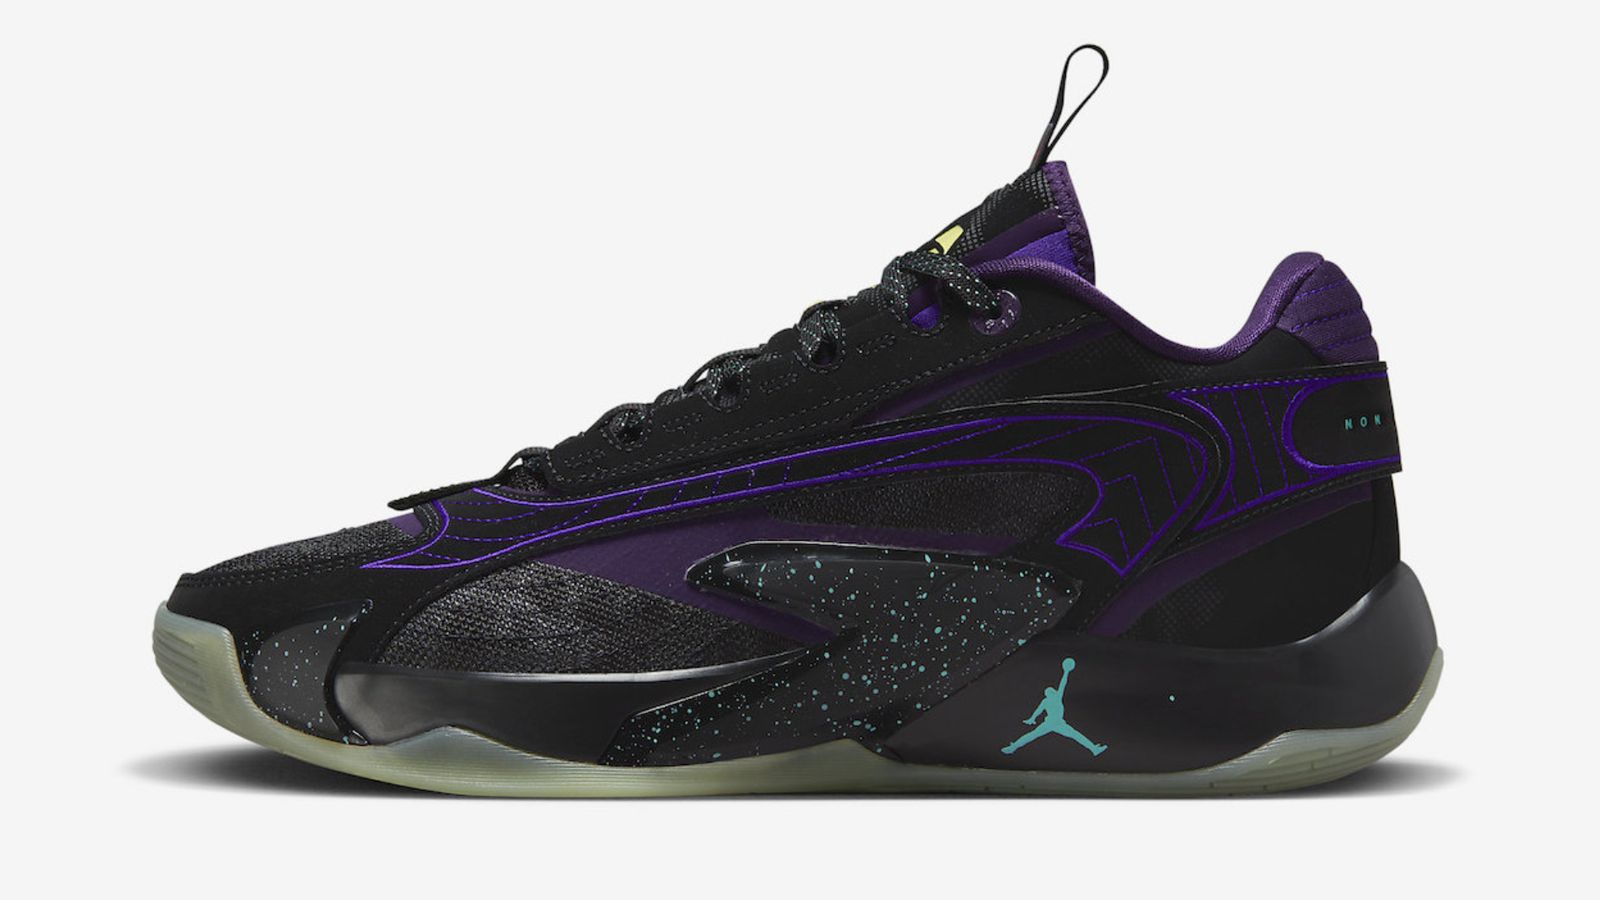 Jordan Luka 2 product image of a black low-top featuring dark purple and teal details, including speckles in the midsole.